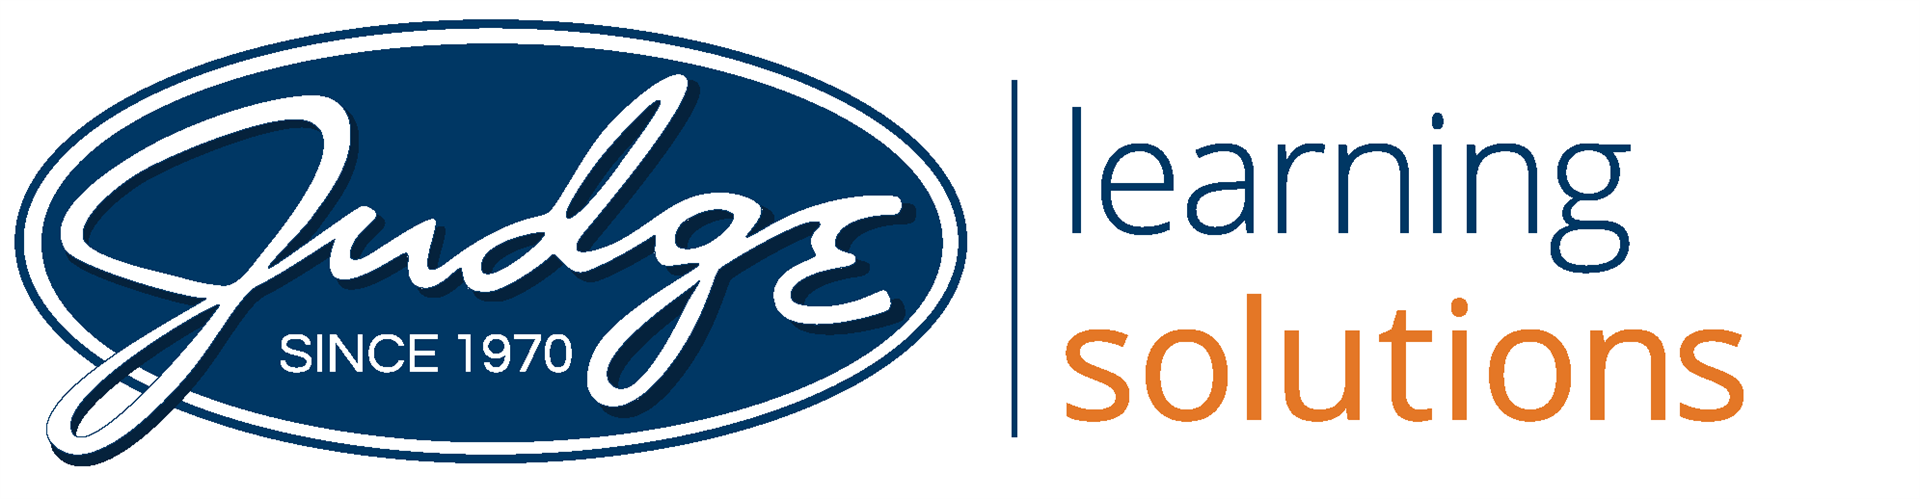 Judge Learning Solutions Logo